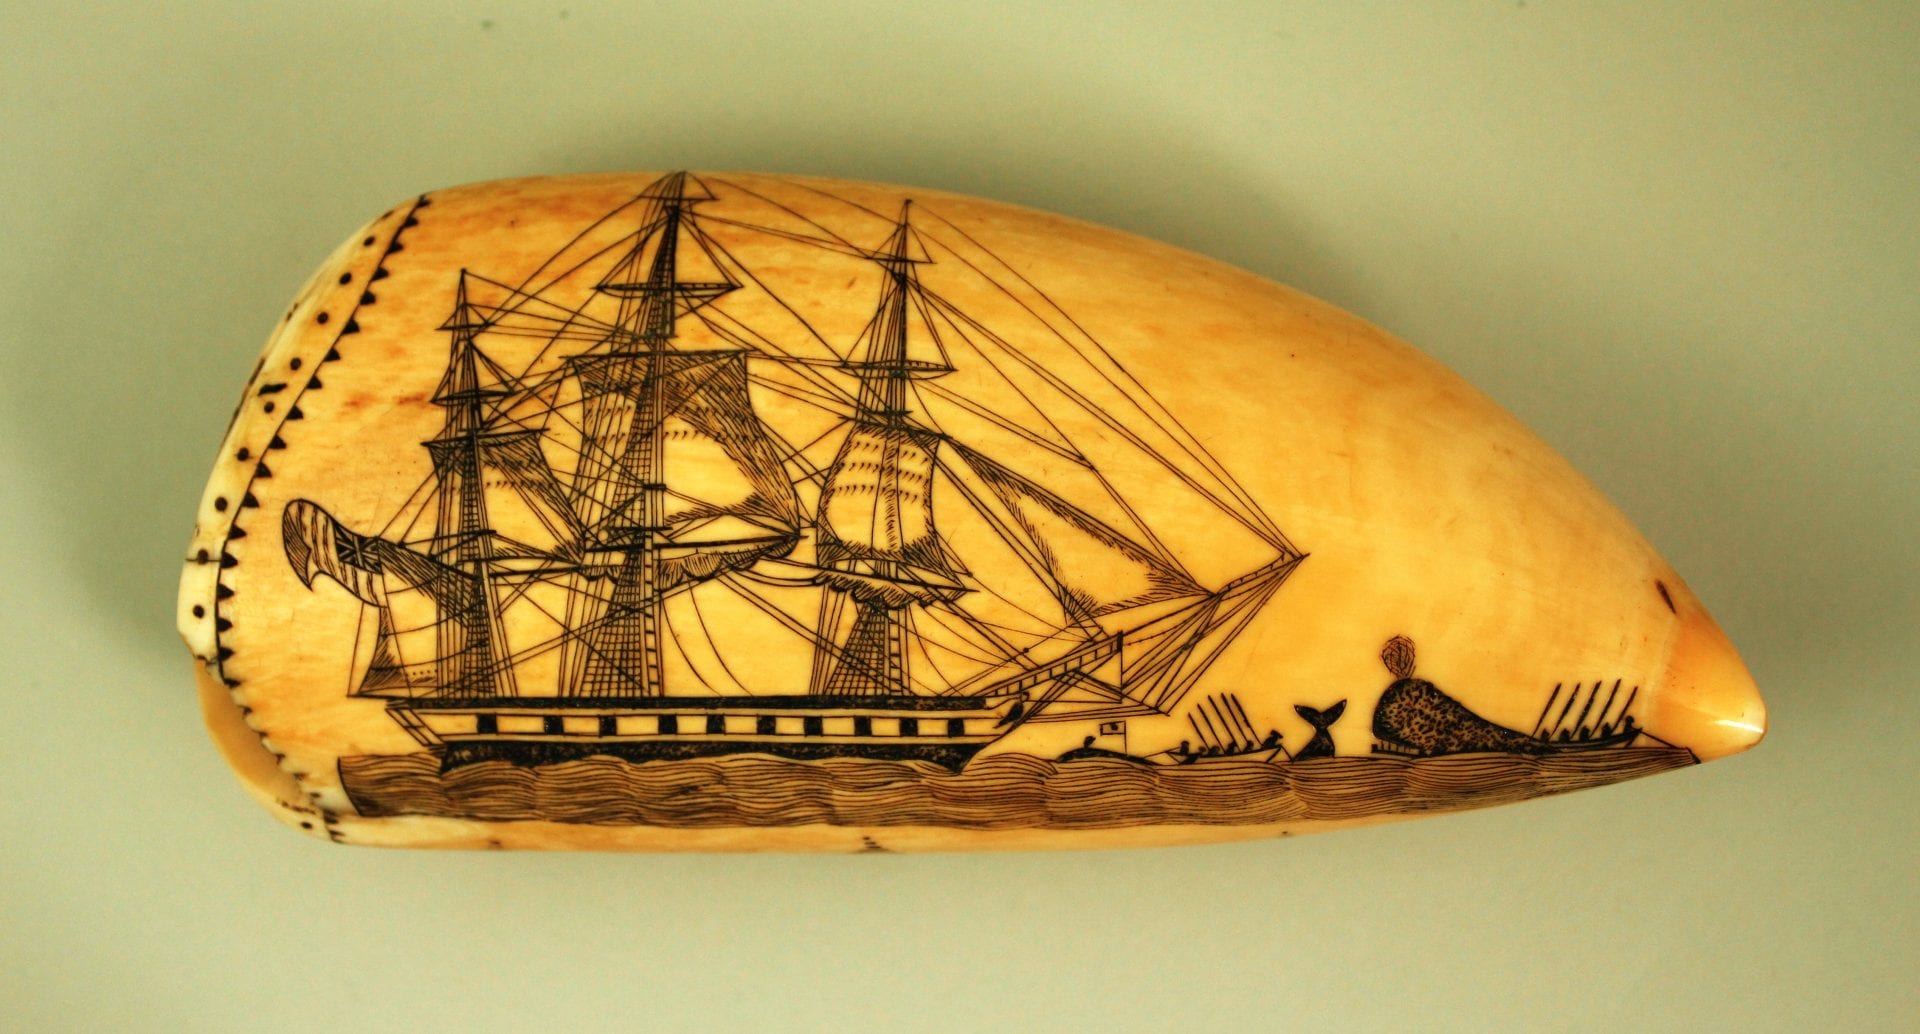 Exhibitions_OnView_Scrimshaw_Supporting Image 2